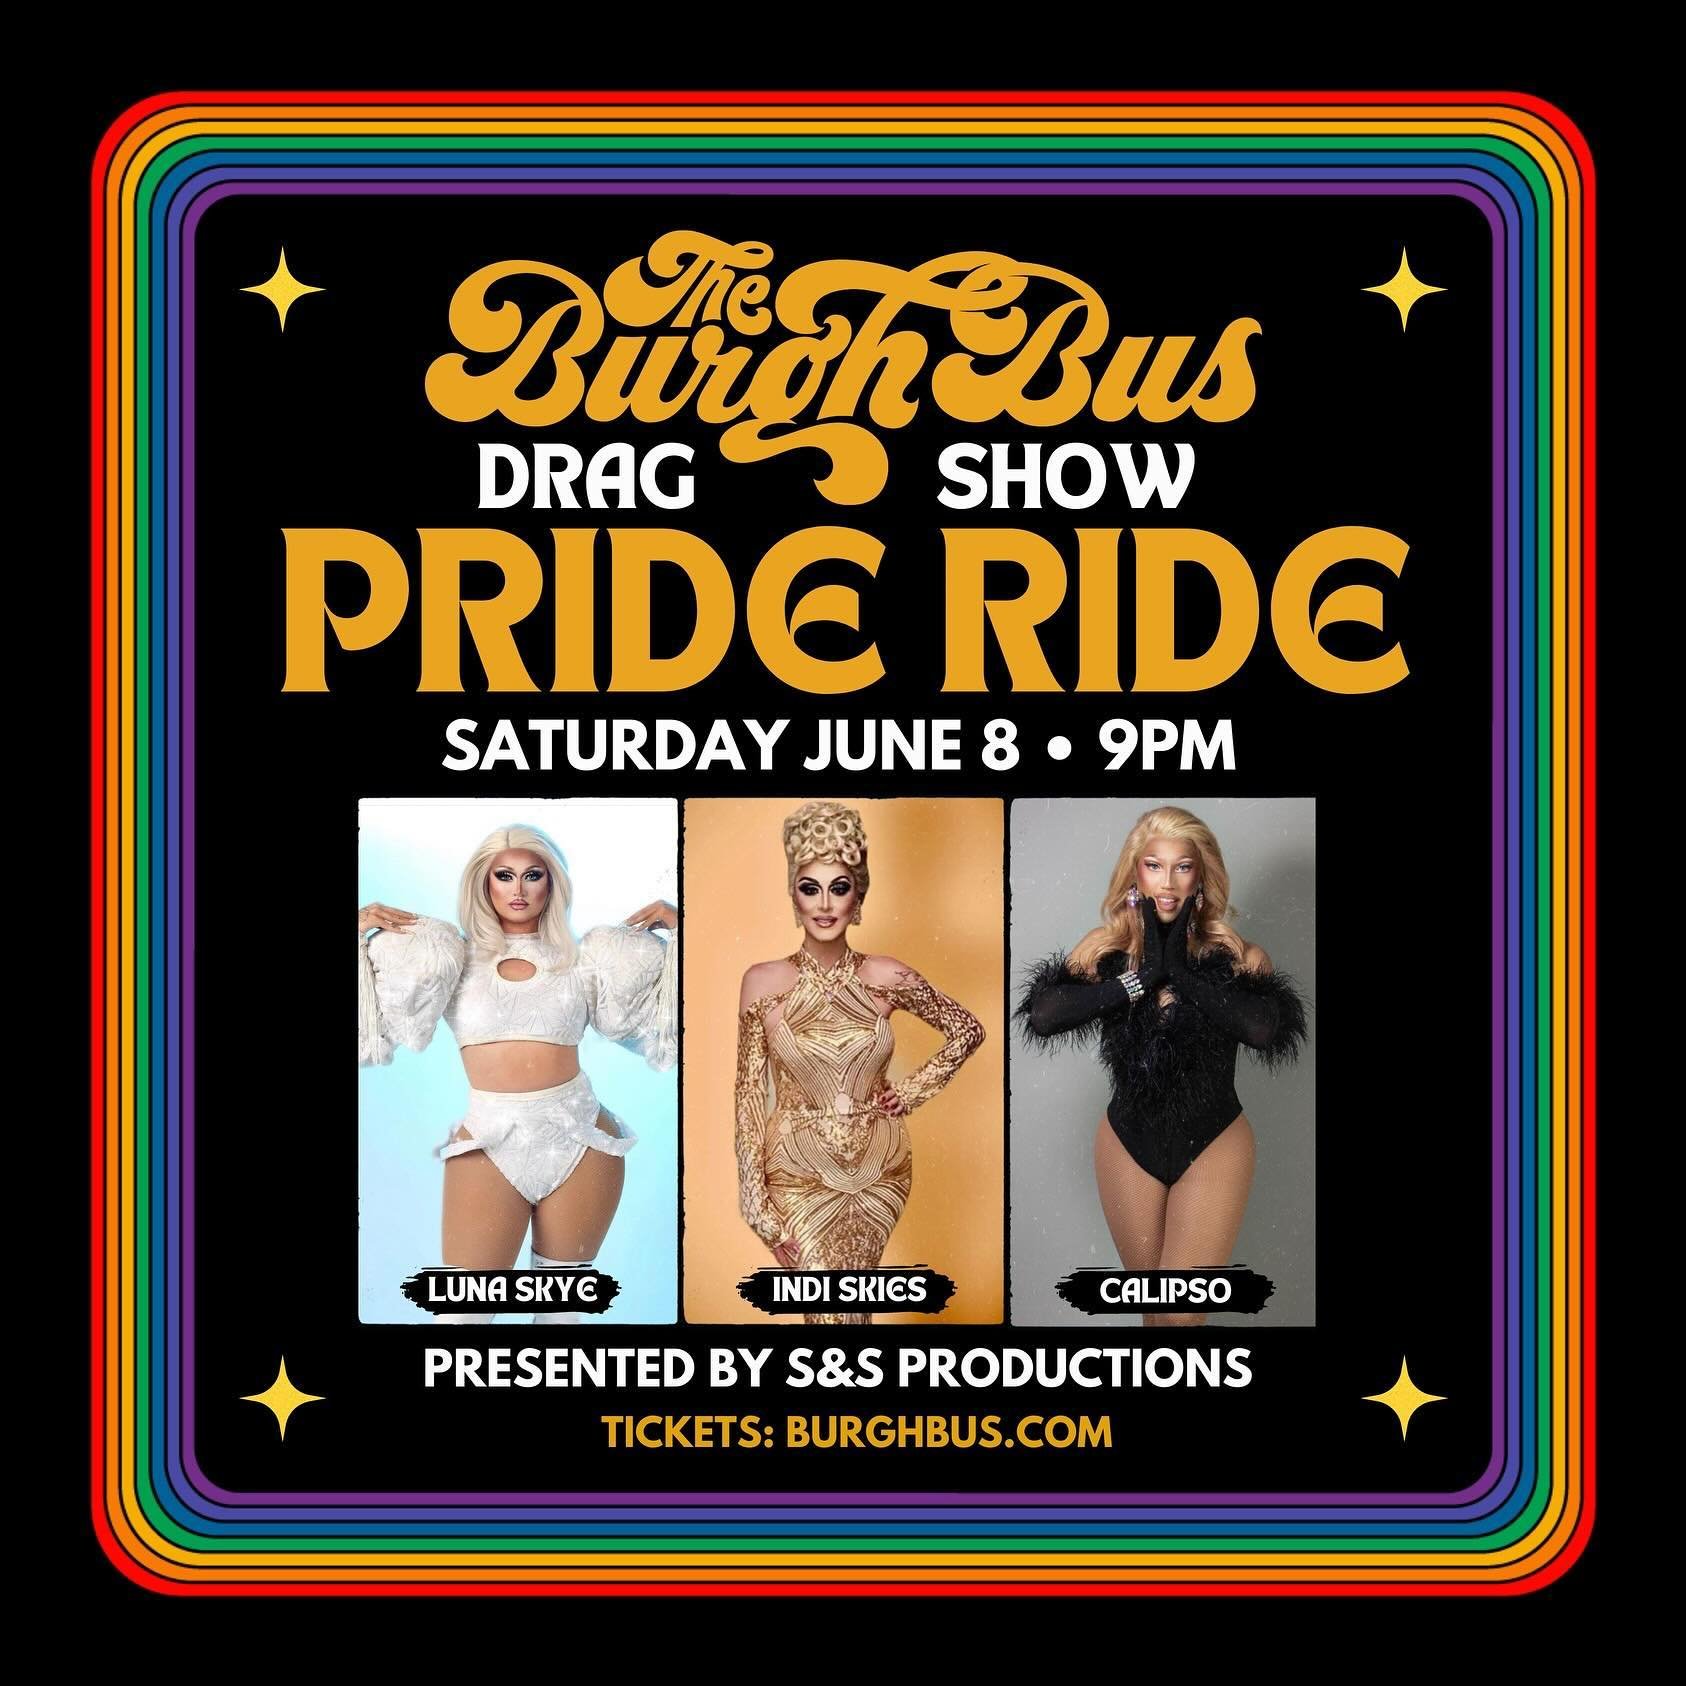 Pittsburgh&rsquo;s ONE &amp; ONLY Drag Show on Wheels returns!!

Join us for another Drag Show on the bus&hellip; Pride Ride edition🏳️&zwj;🌈🚌🏳️&zwj;⚧️

This R-rated Pride Ride is presented by S&amp;S Productions and will feature drag performances